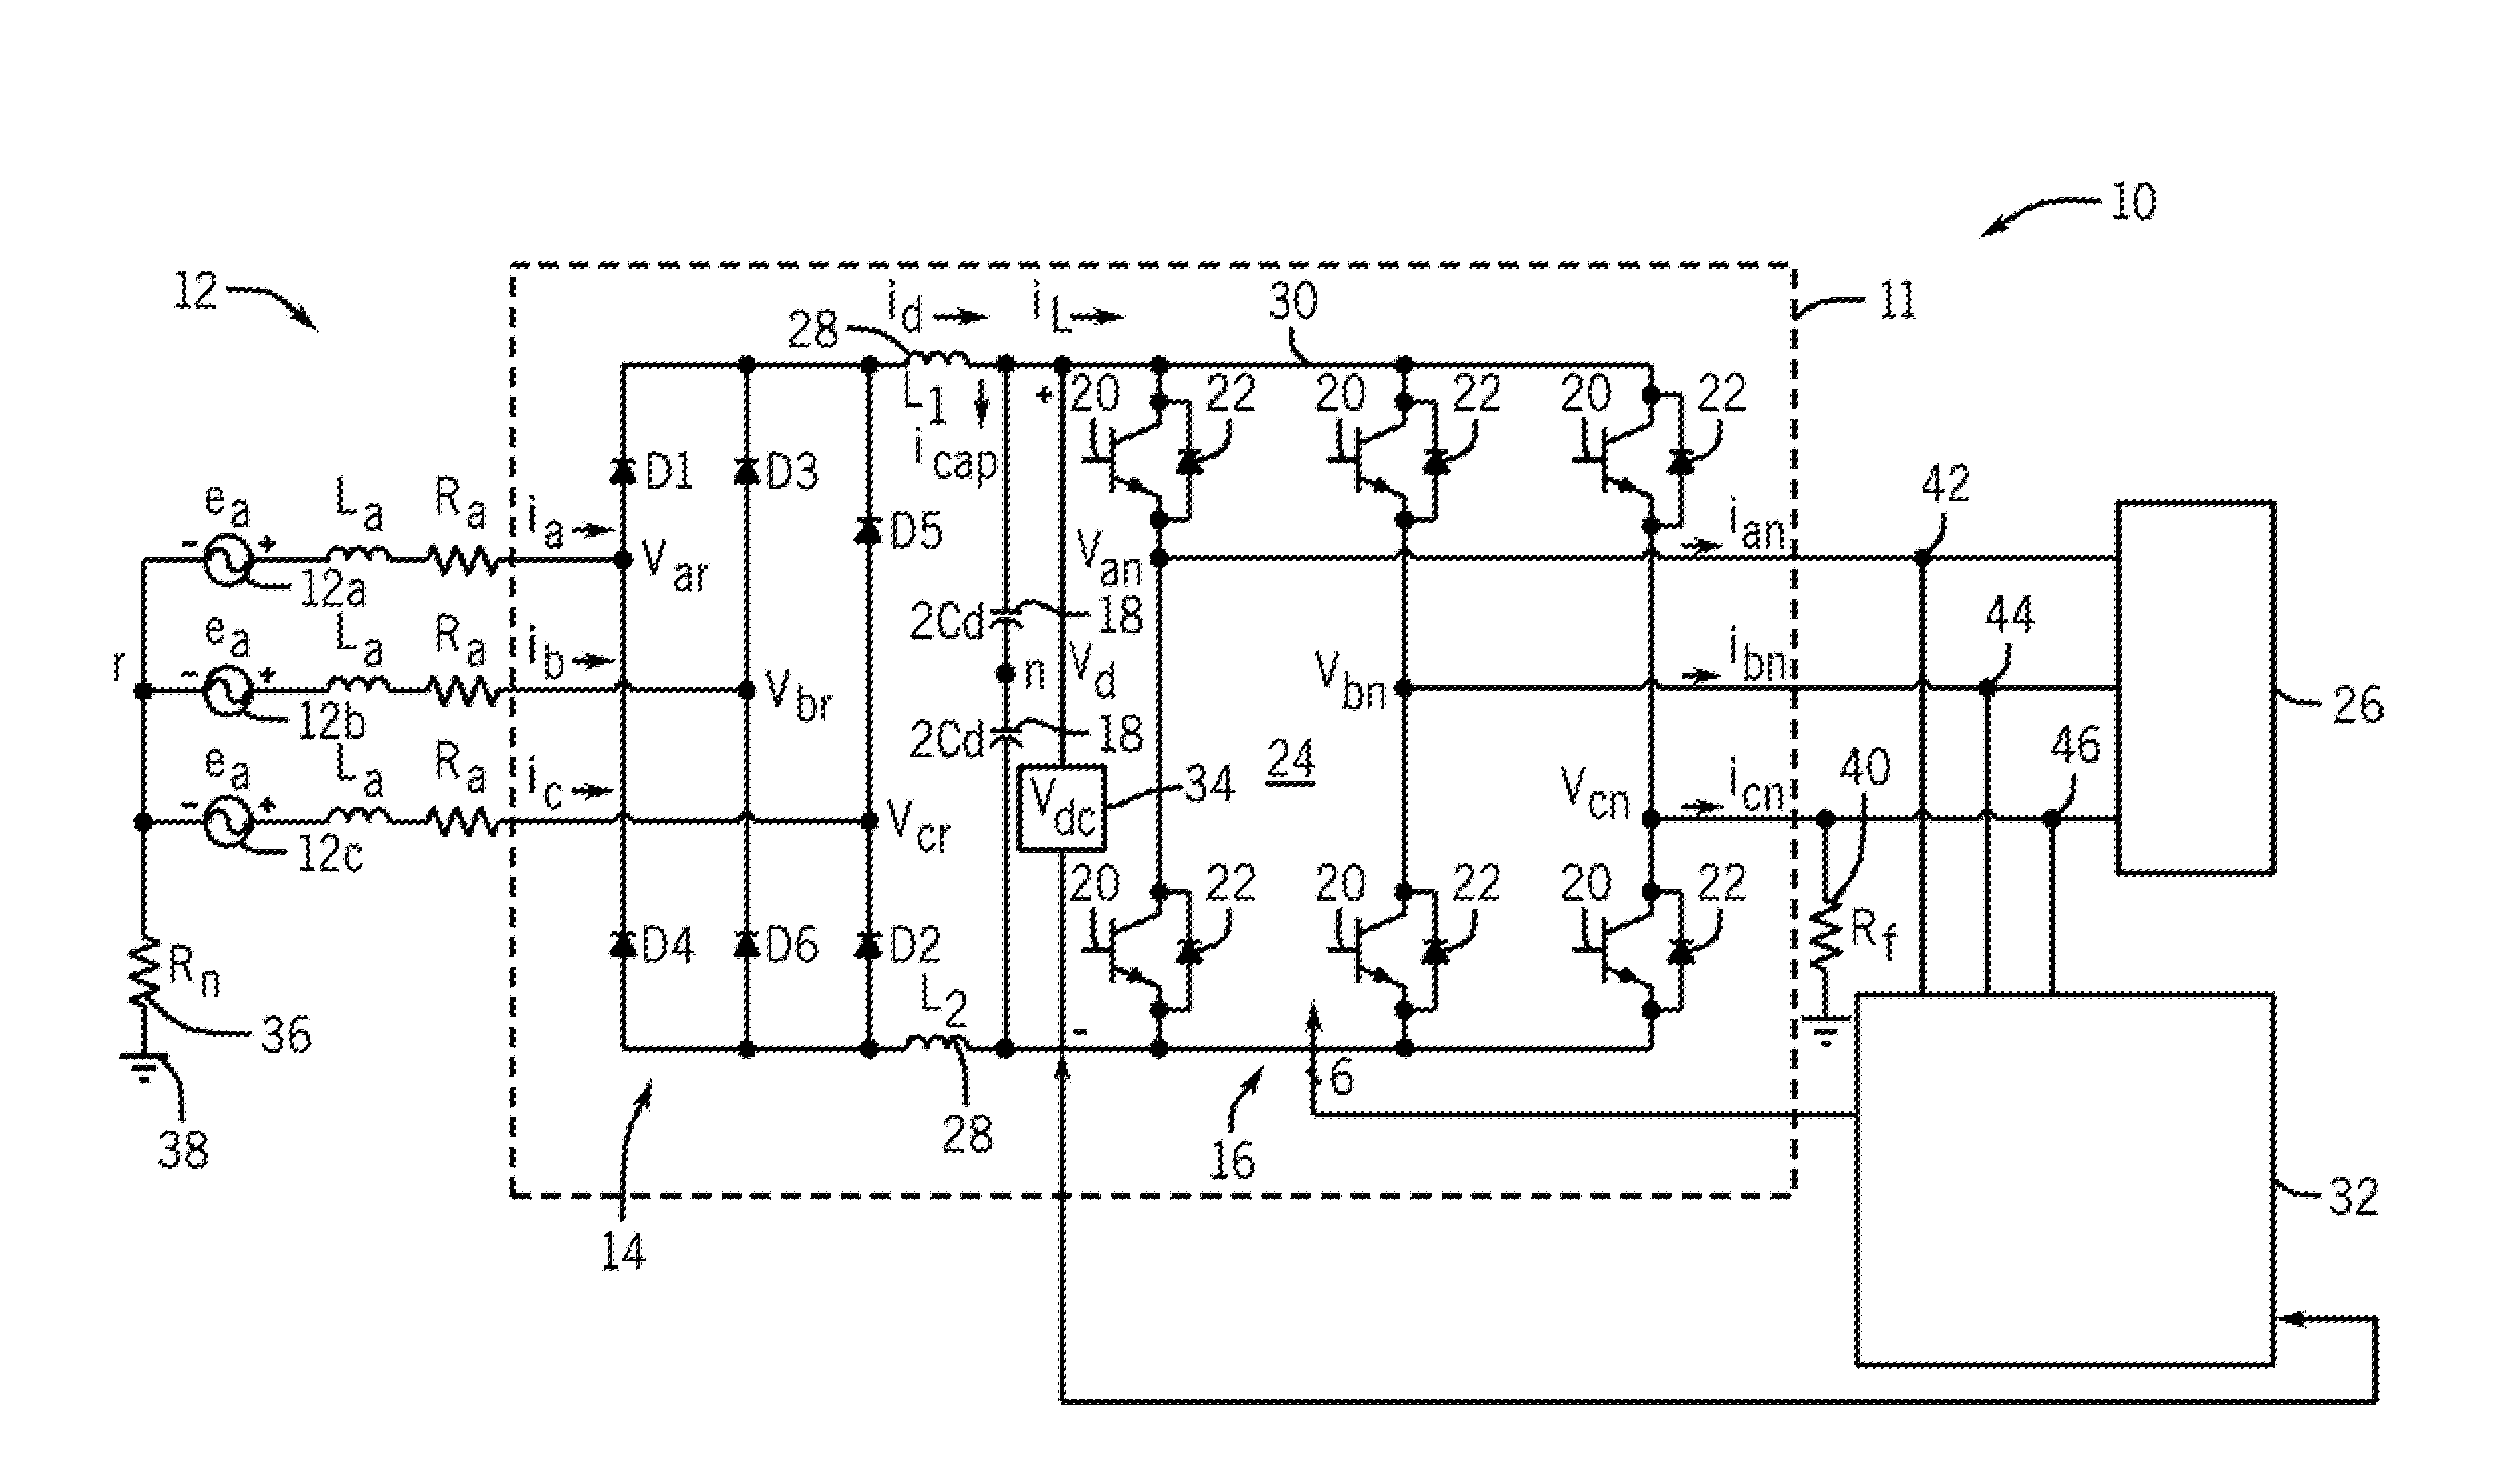 System and method for high resistance ground fault detection and protection in power distribution systems